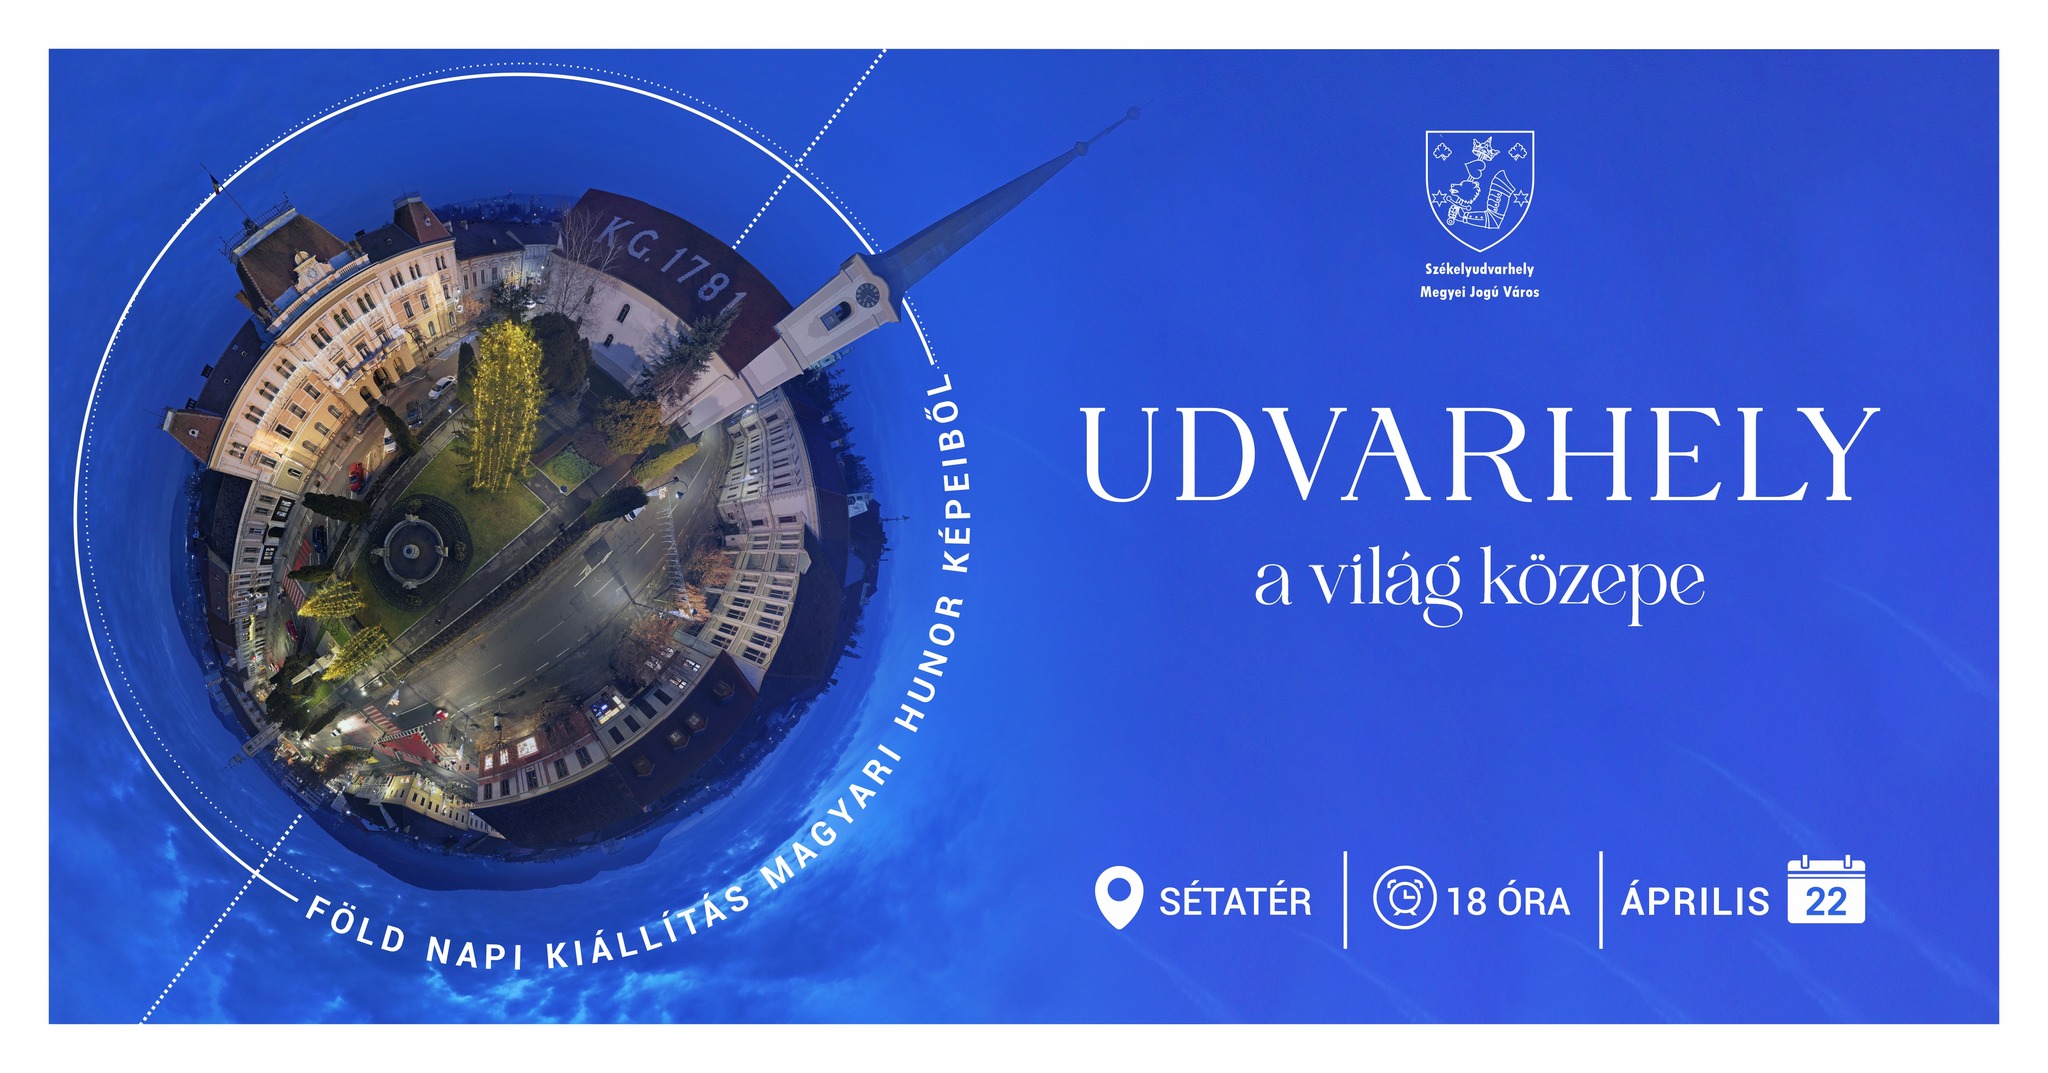 Udvarhely is the centre of the world - Photo exhibition